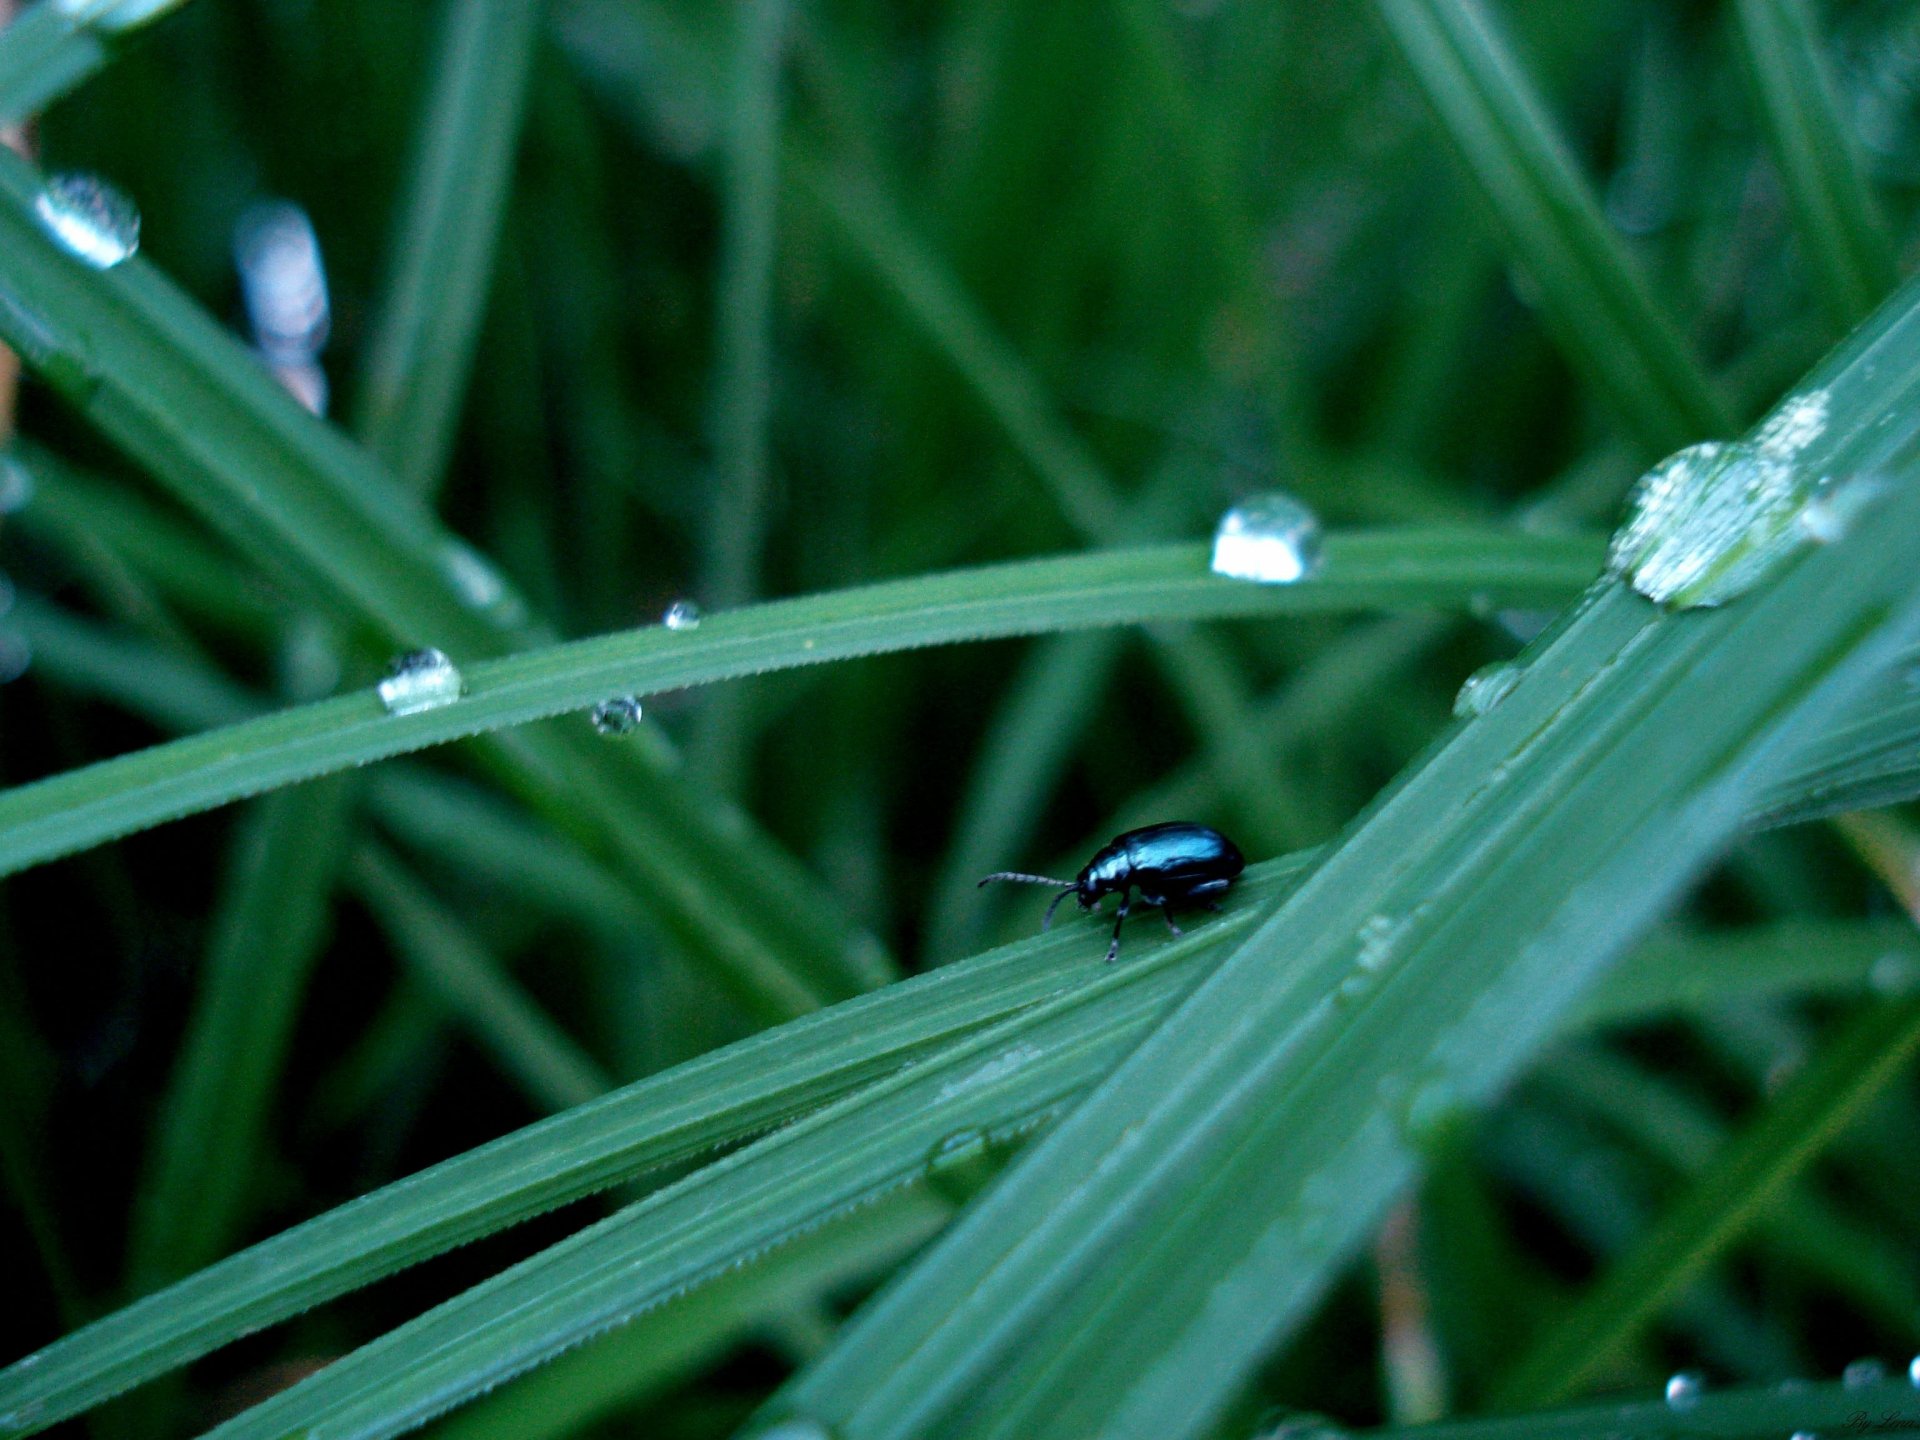 The background is a dark beetle after the rain on the green grass